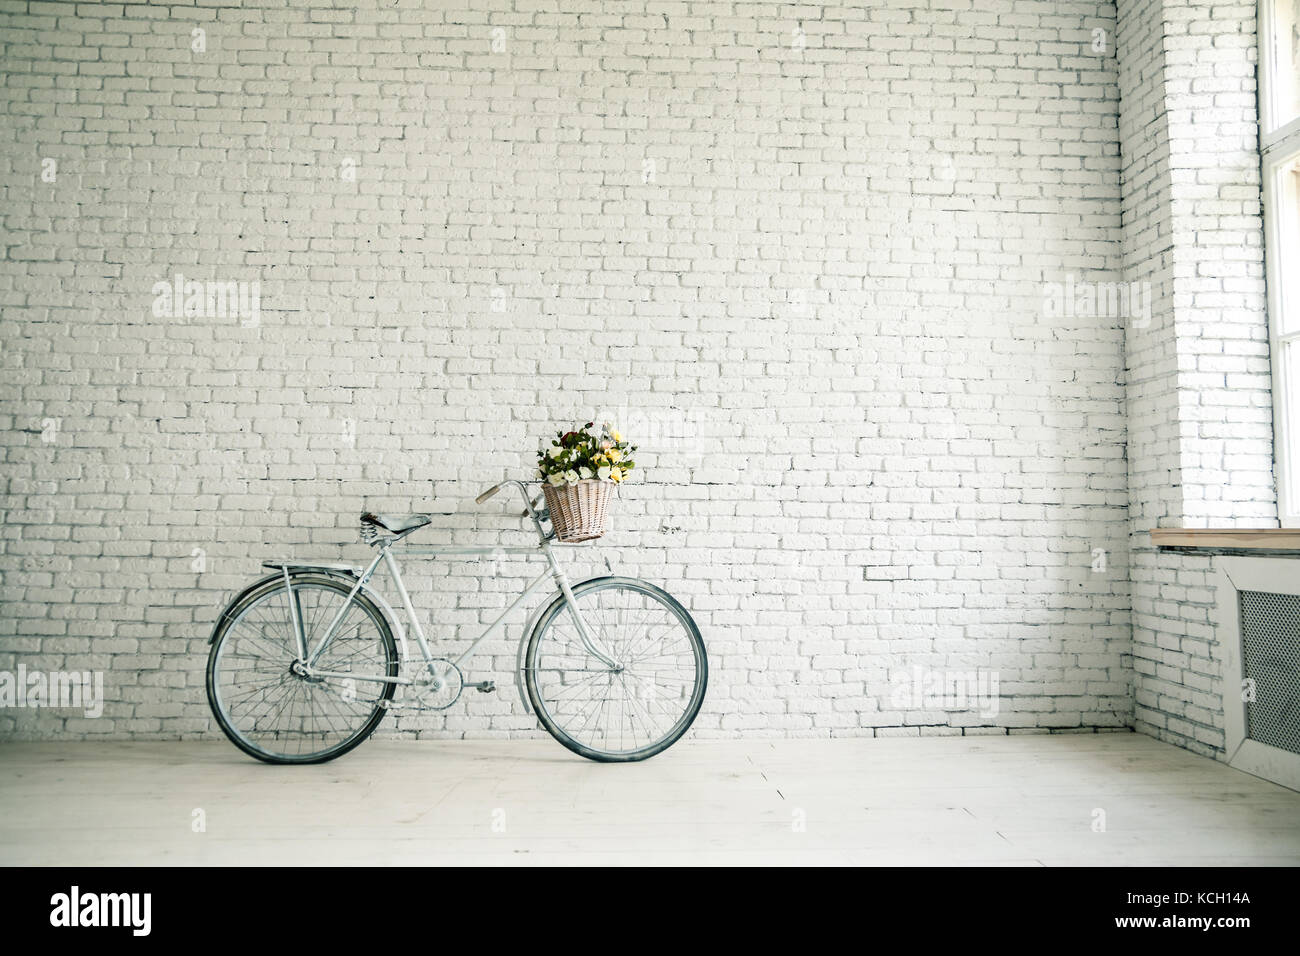 Retro bicycle on roadside with vintage brick wall background, Stock Photo